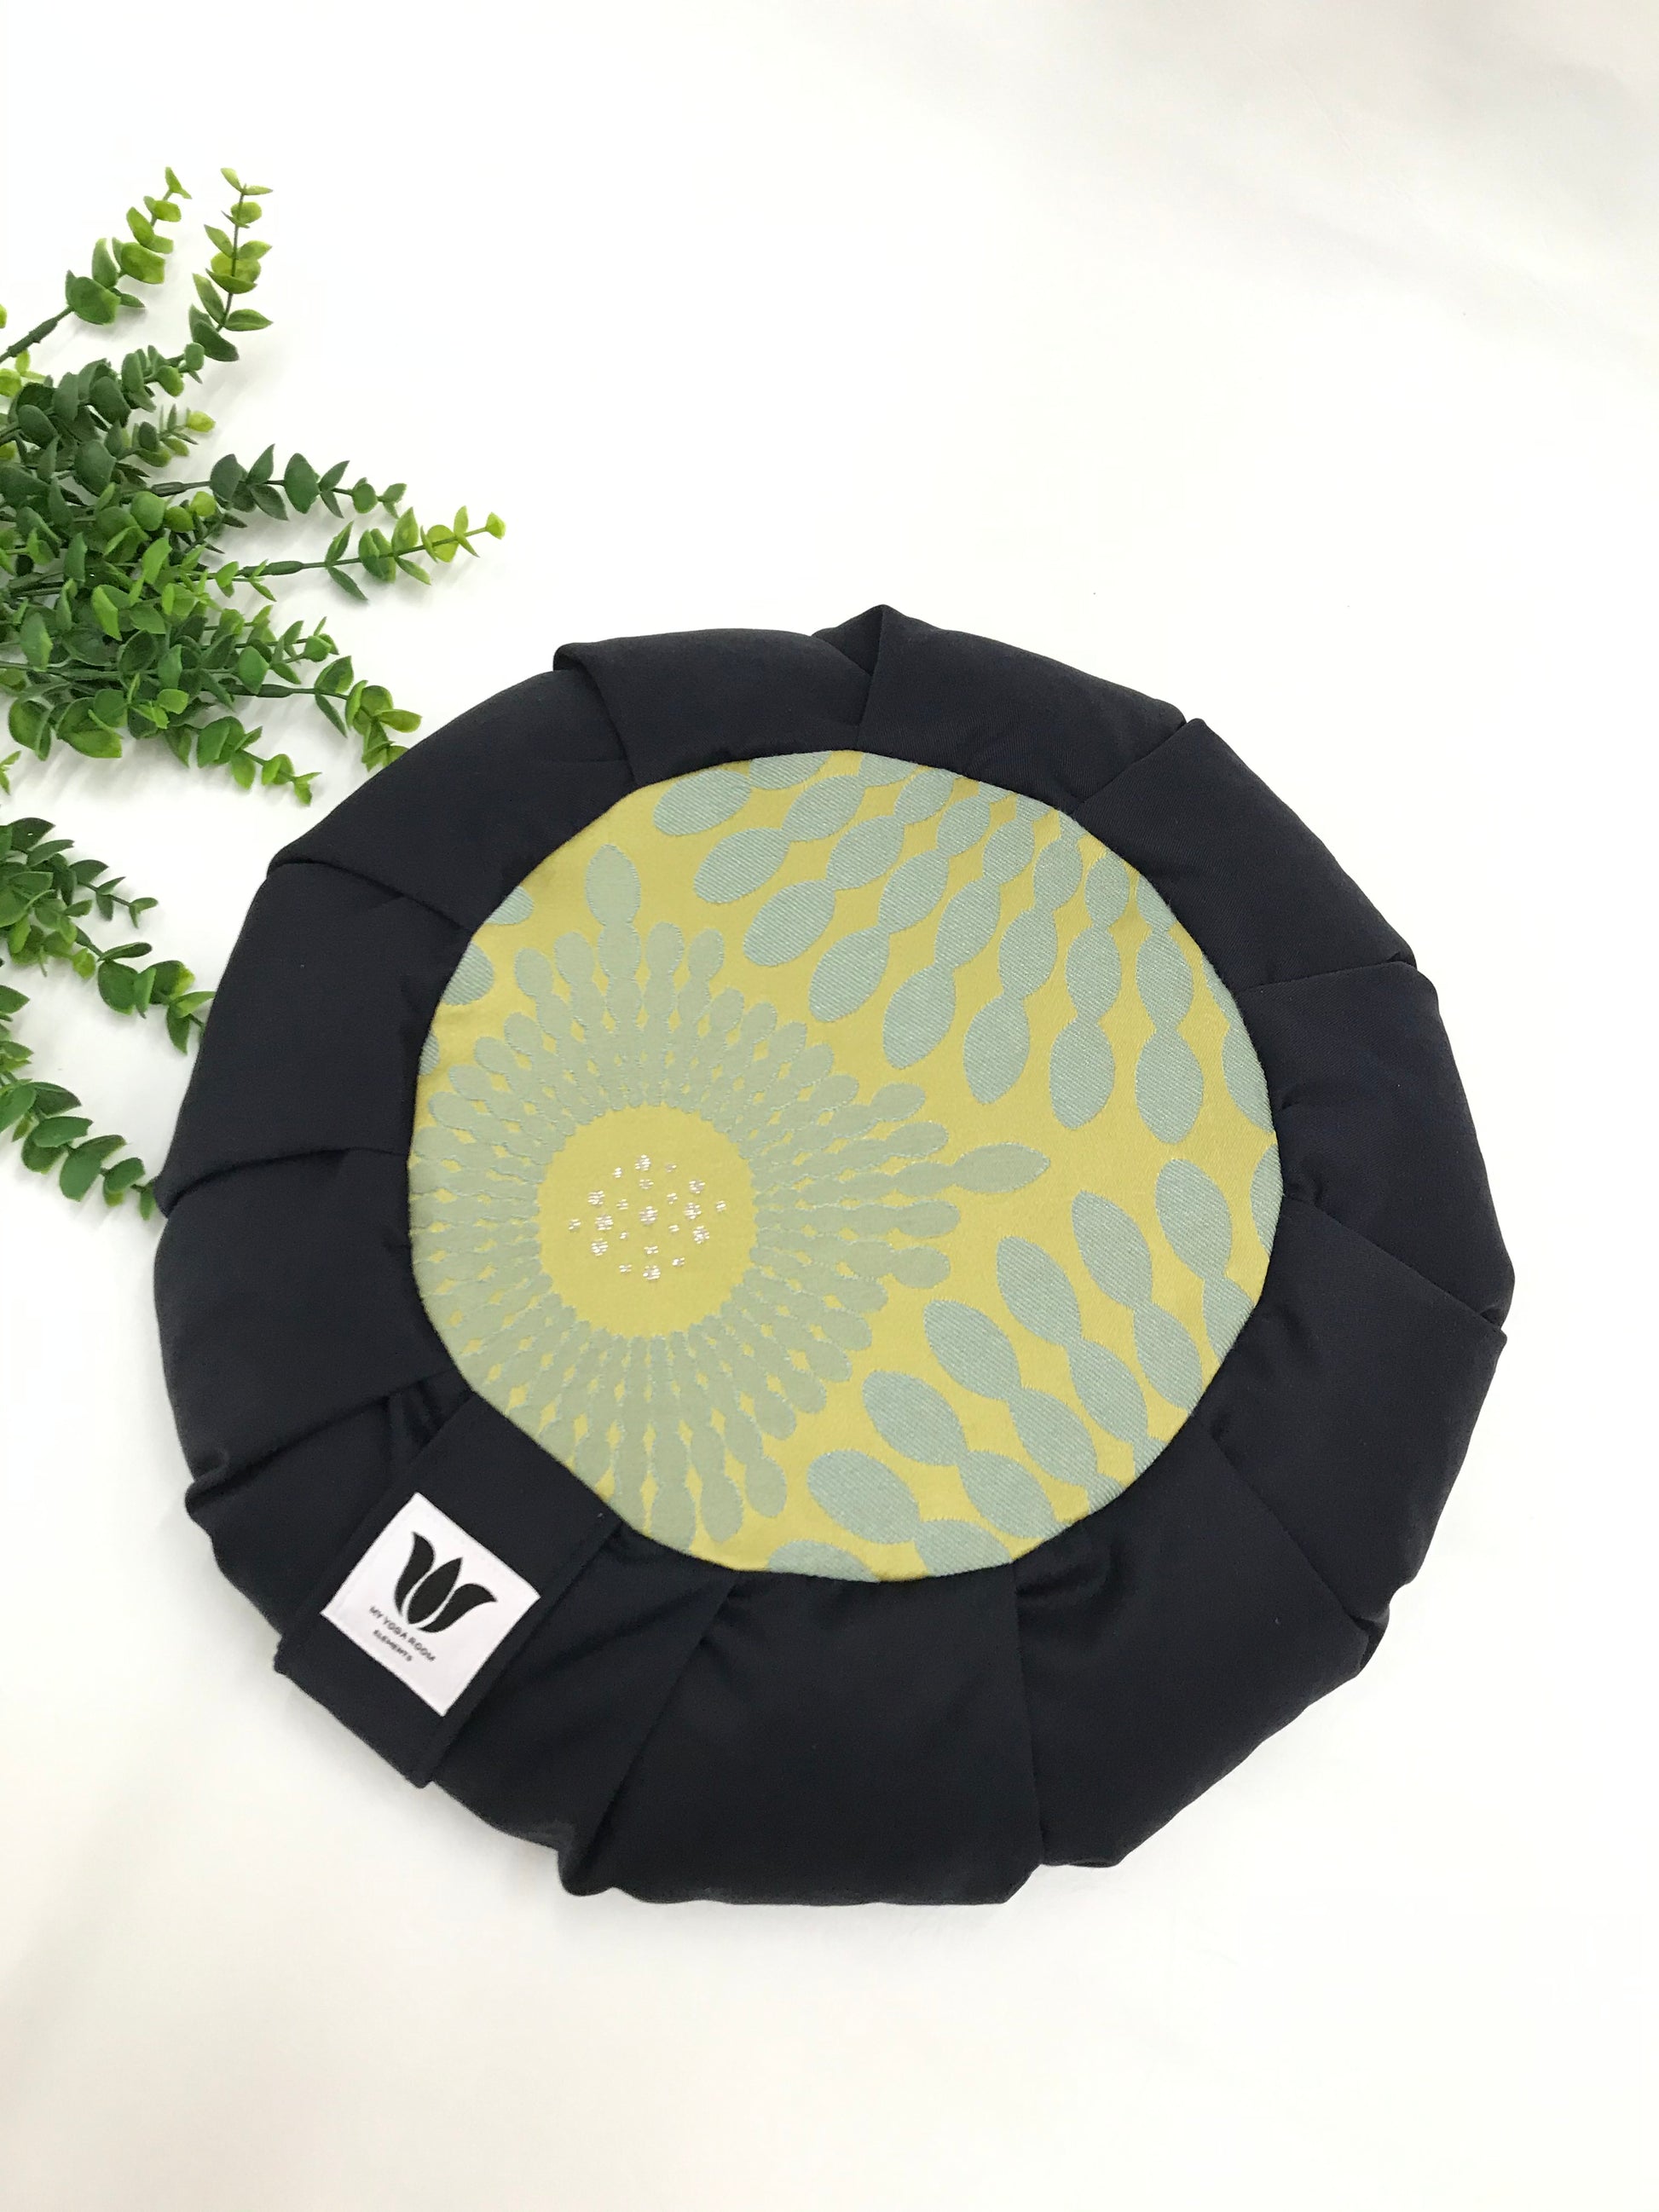 Handcrafted premium cotton canvas meditation seat cushion in solid navy blue and green, grey-blue and silver shot mandala center. Align the spine and body in comfort to calm the monkey mind in your meditation practice. Handcrafted in Calgary, Alberta Canada